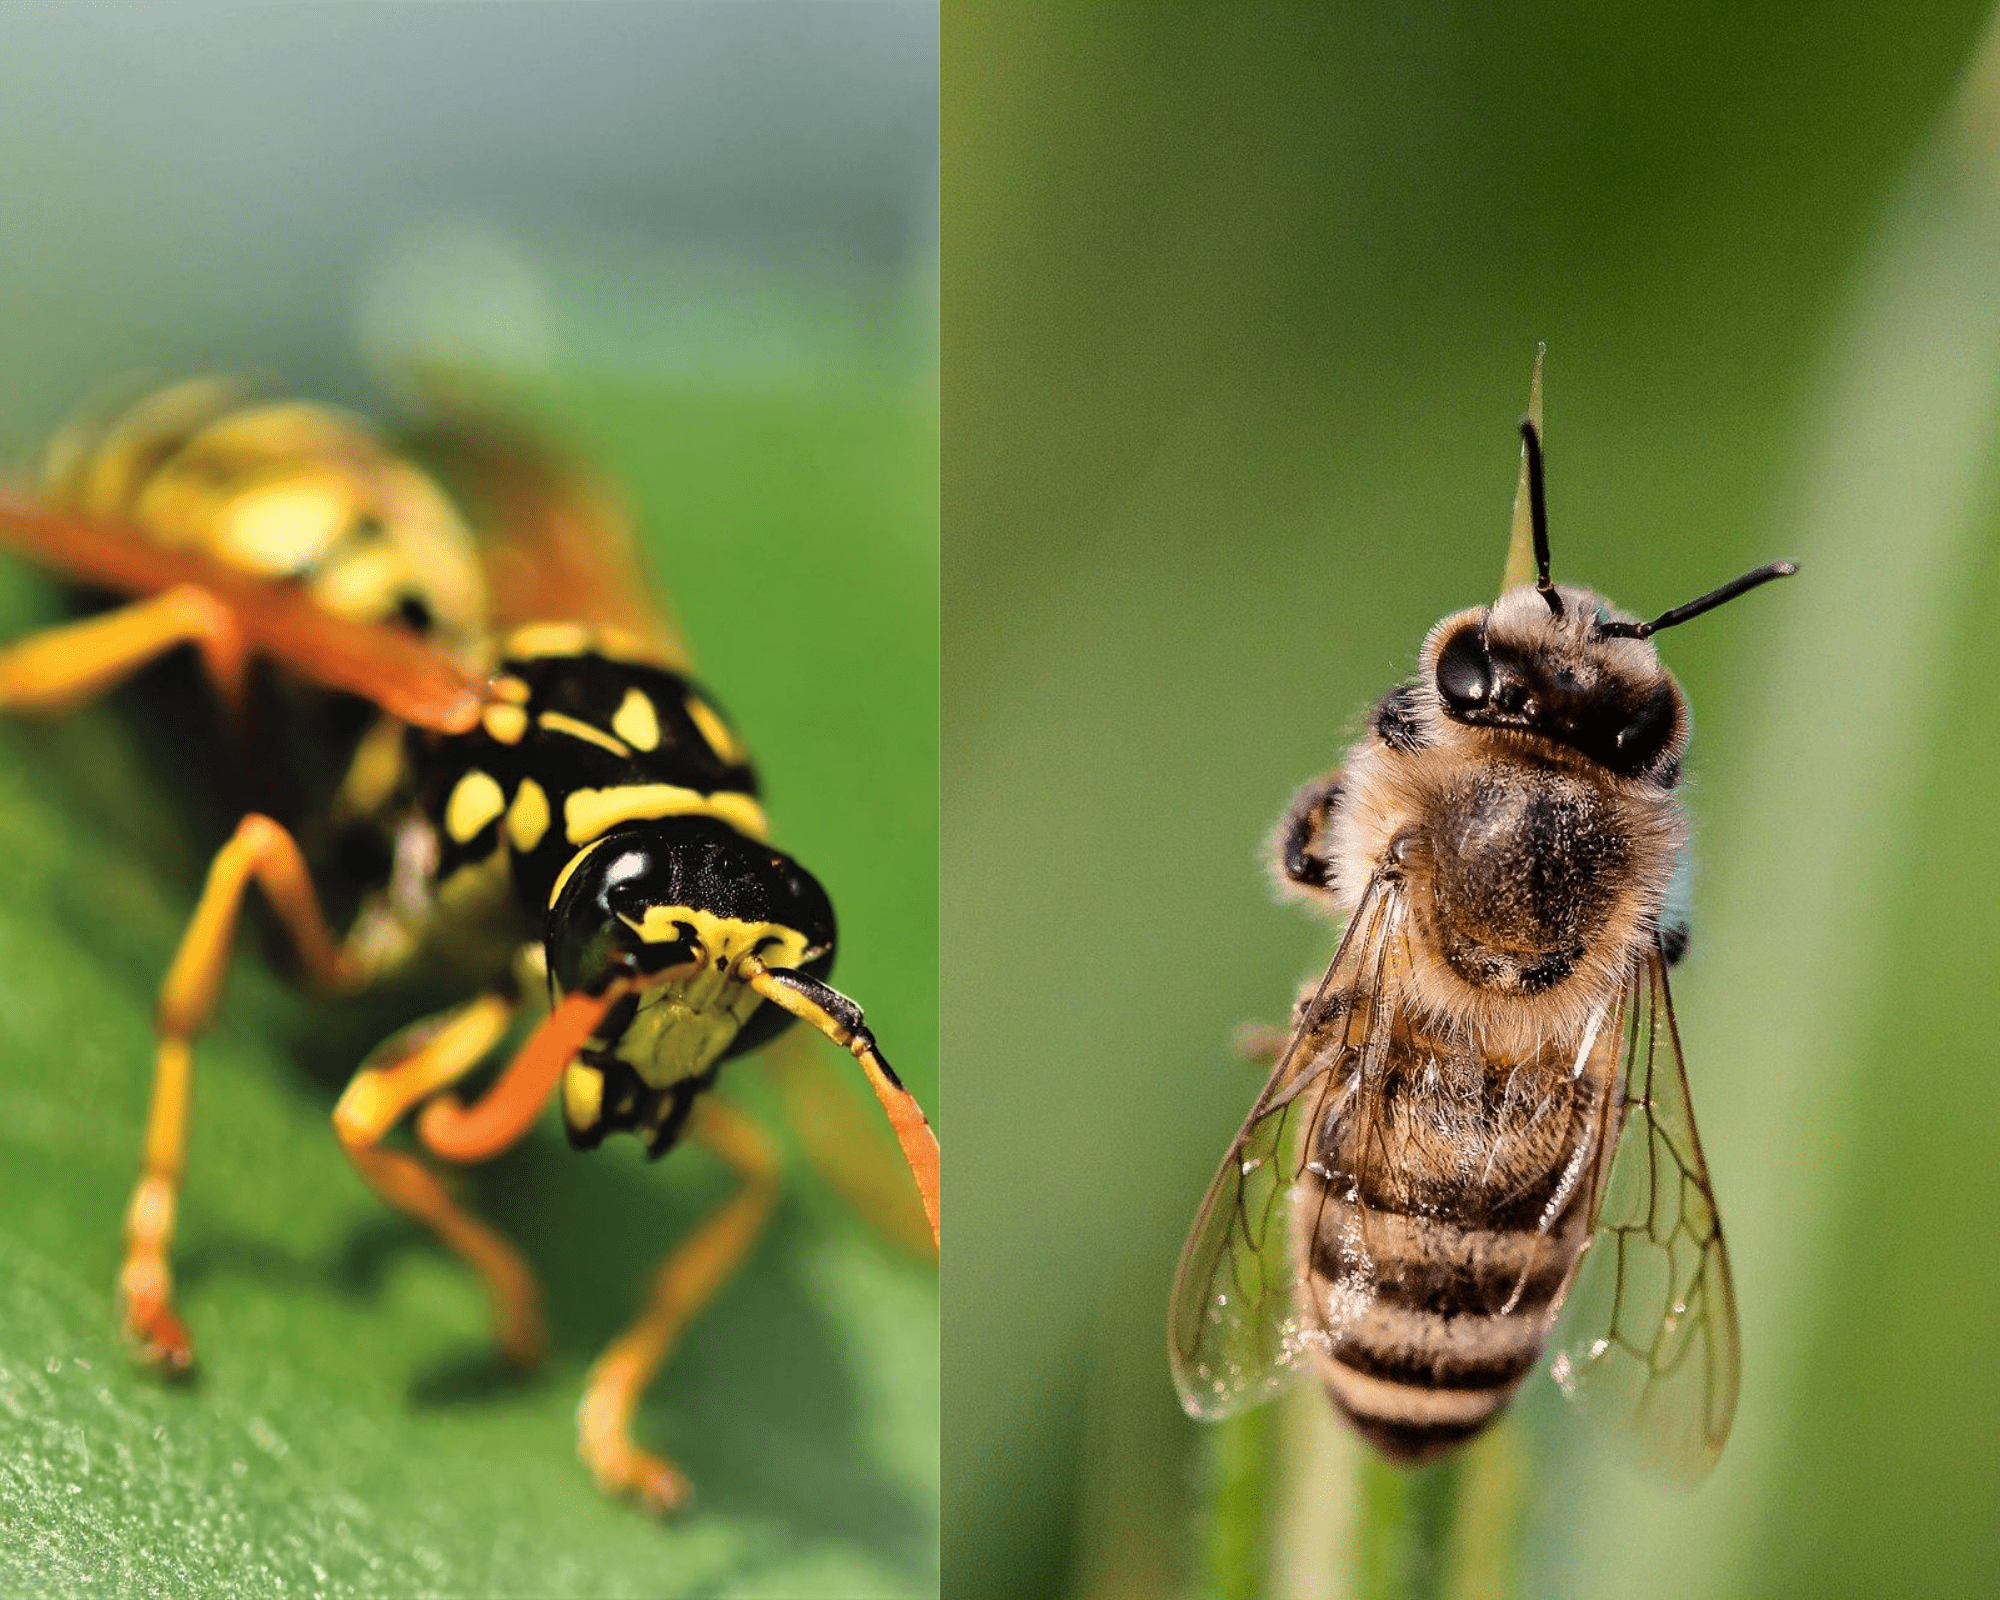 Wasps vs Bees: What's the Difference?